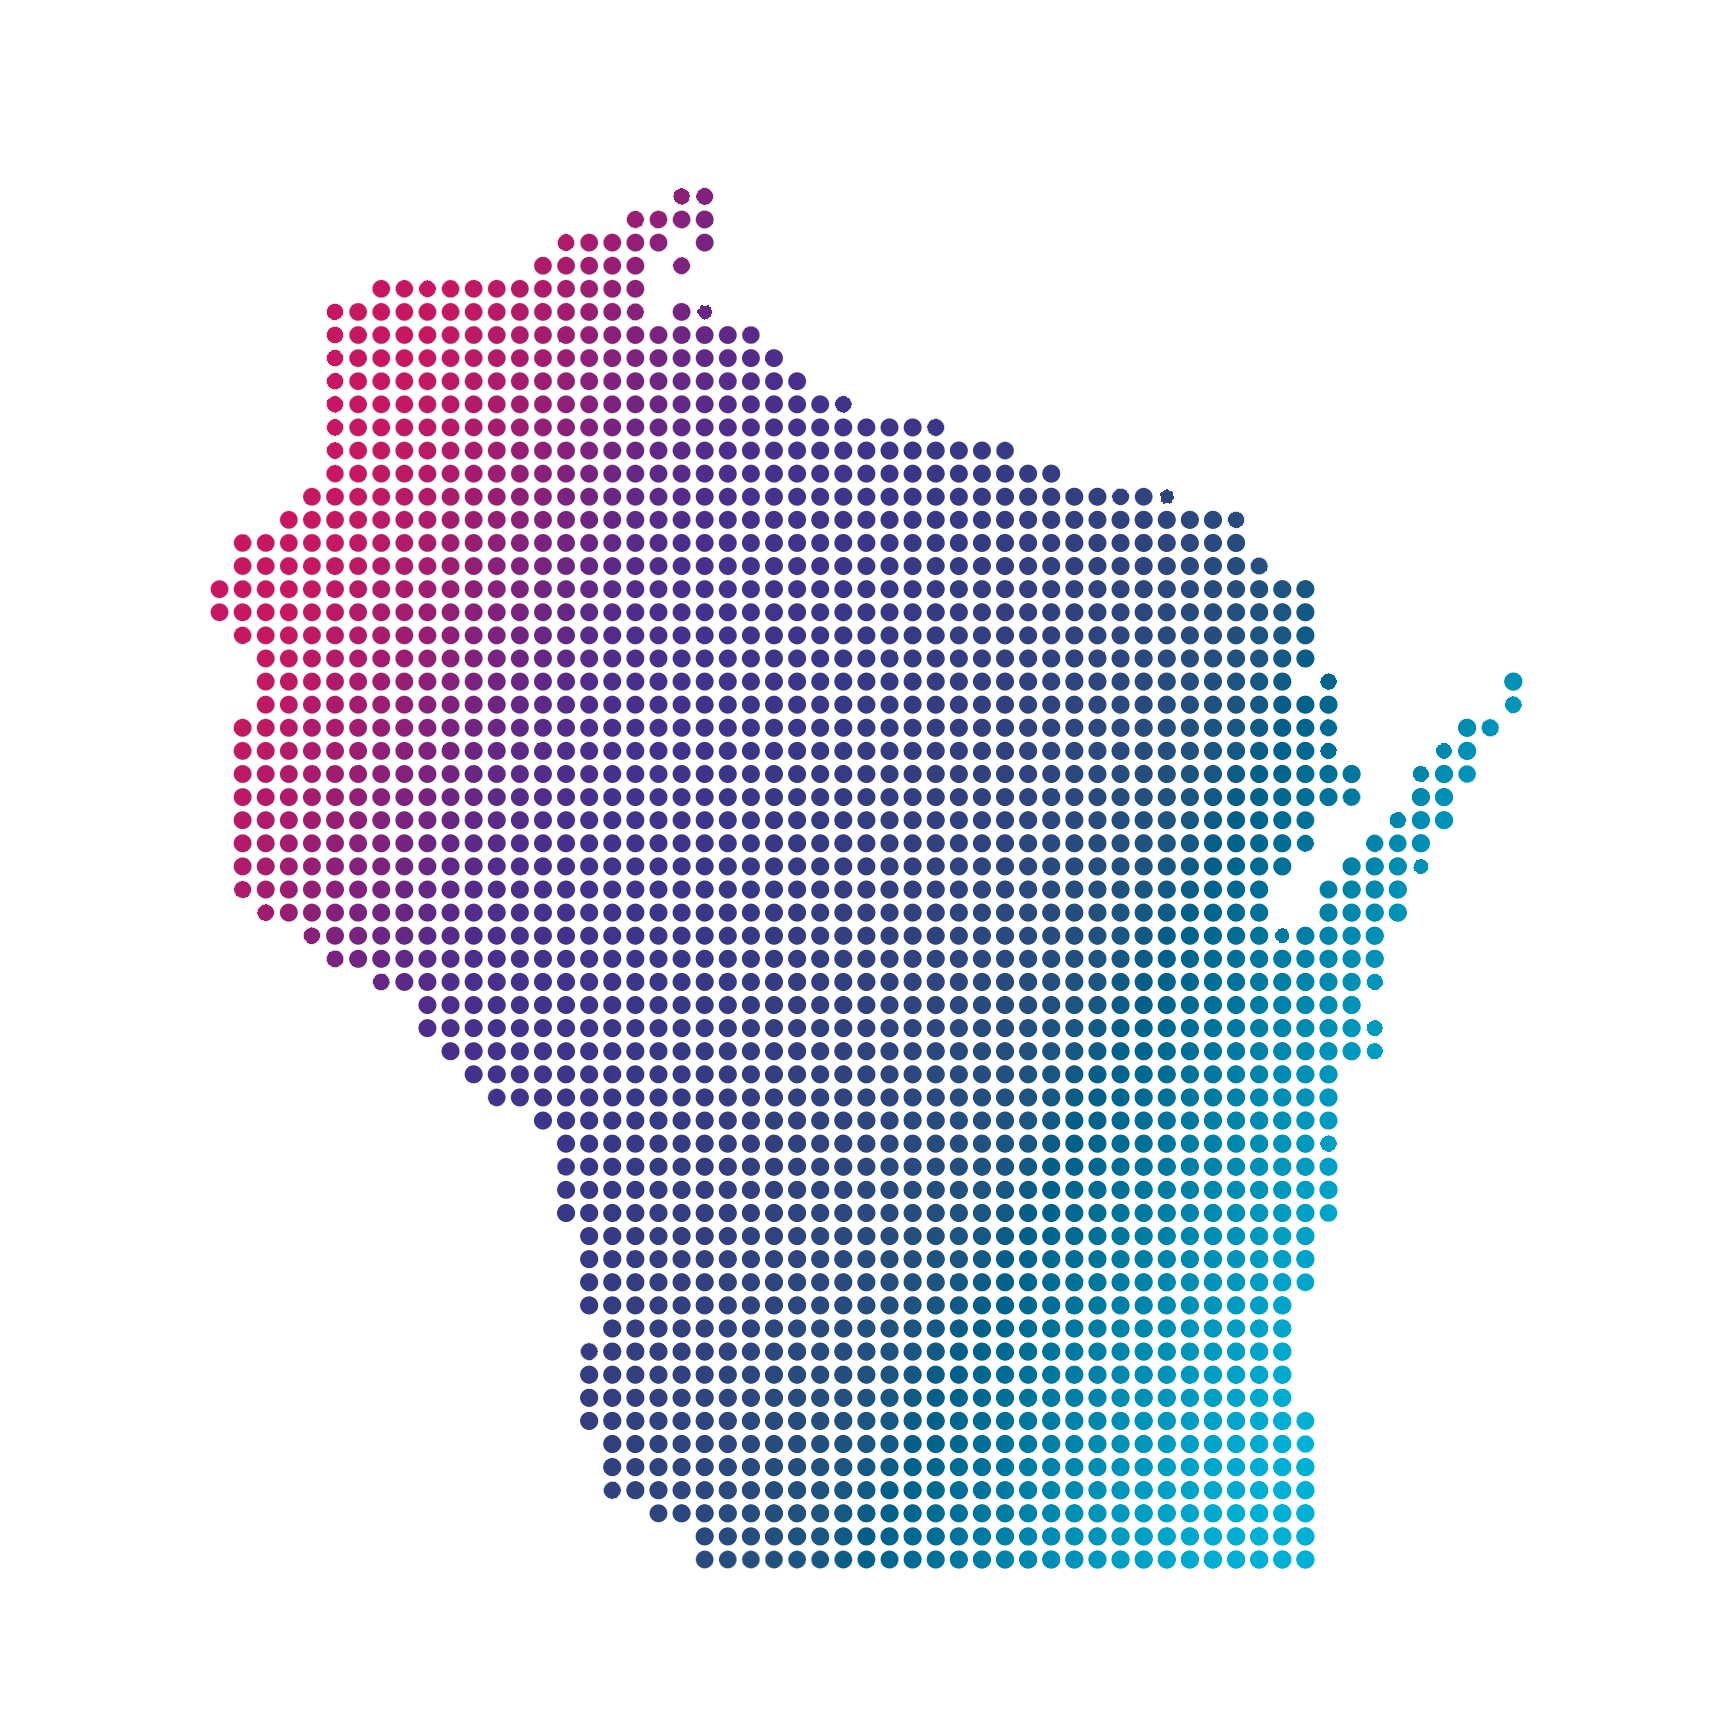 Wisconsin map of blue dots on white background